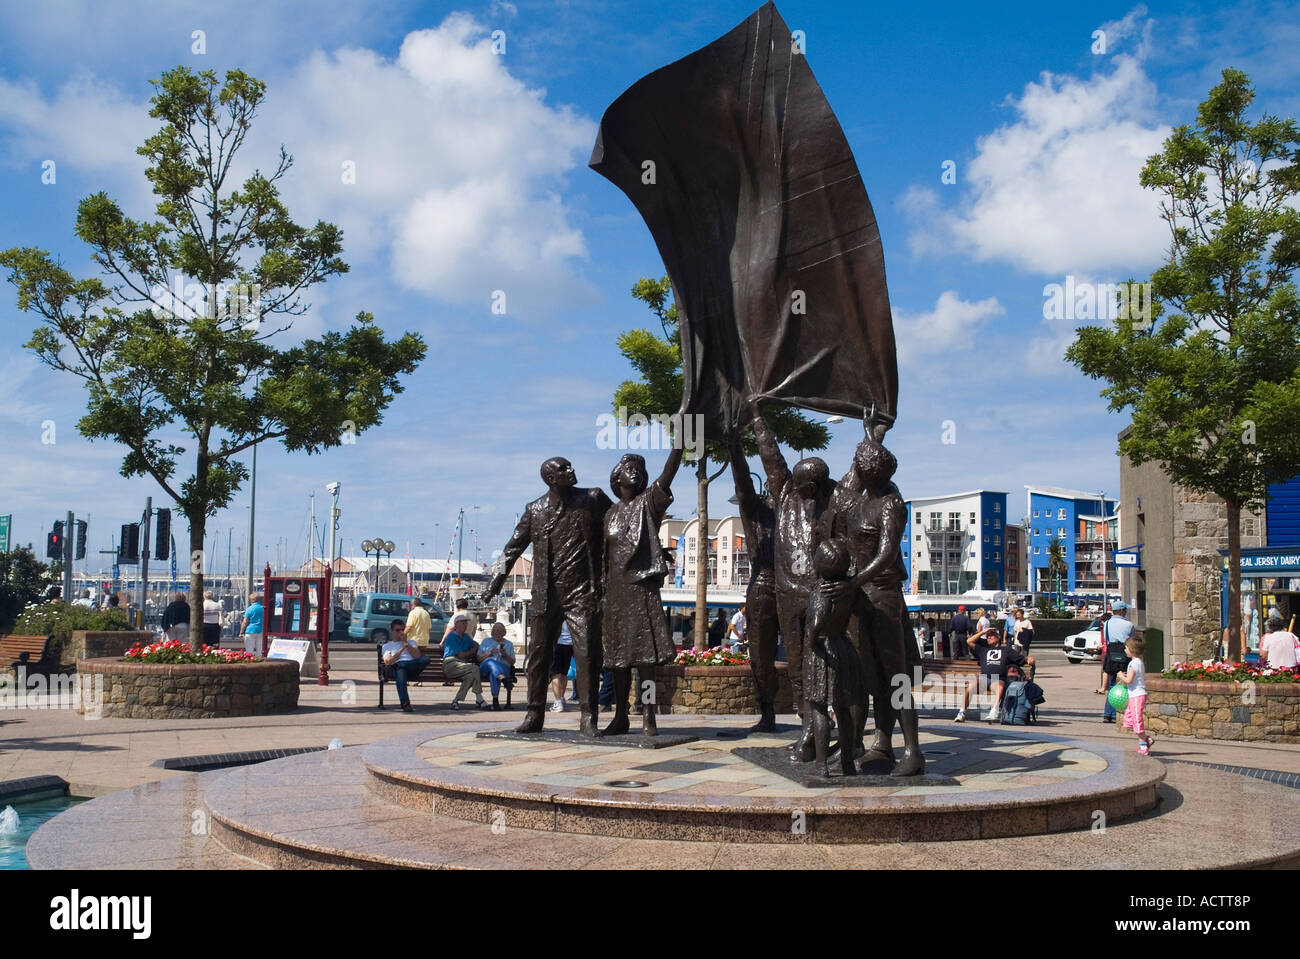 dh Liberation Square ST HELIER JERSEY Liberators statue people on sitting benchs waterfront square german channel islands occupation ww ii world war 2 Stock Photo